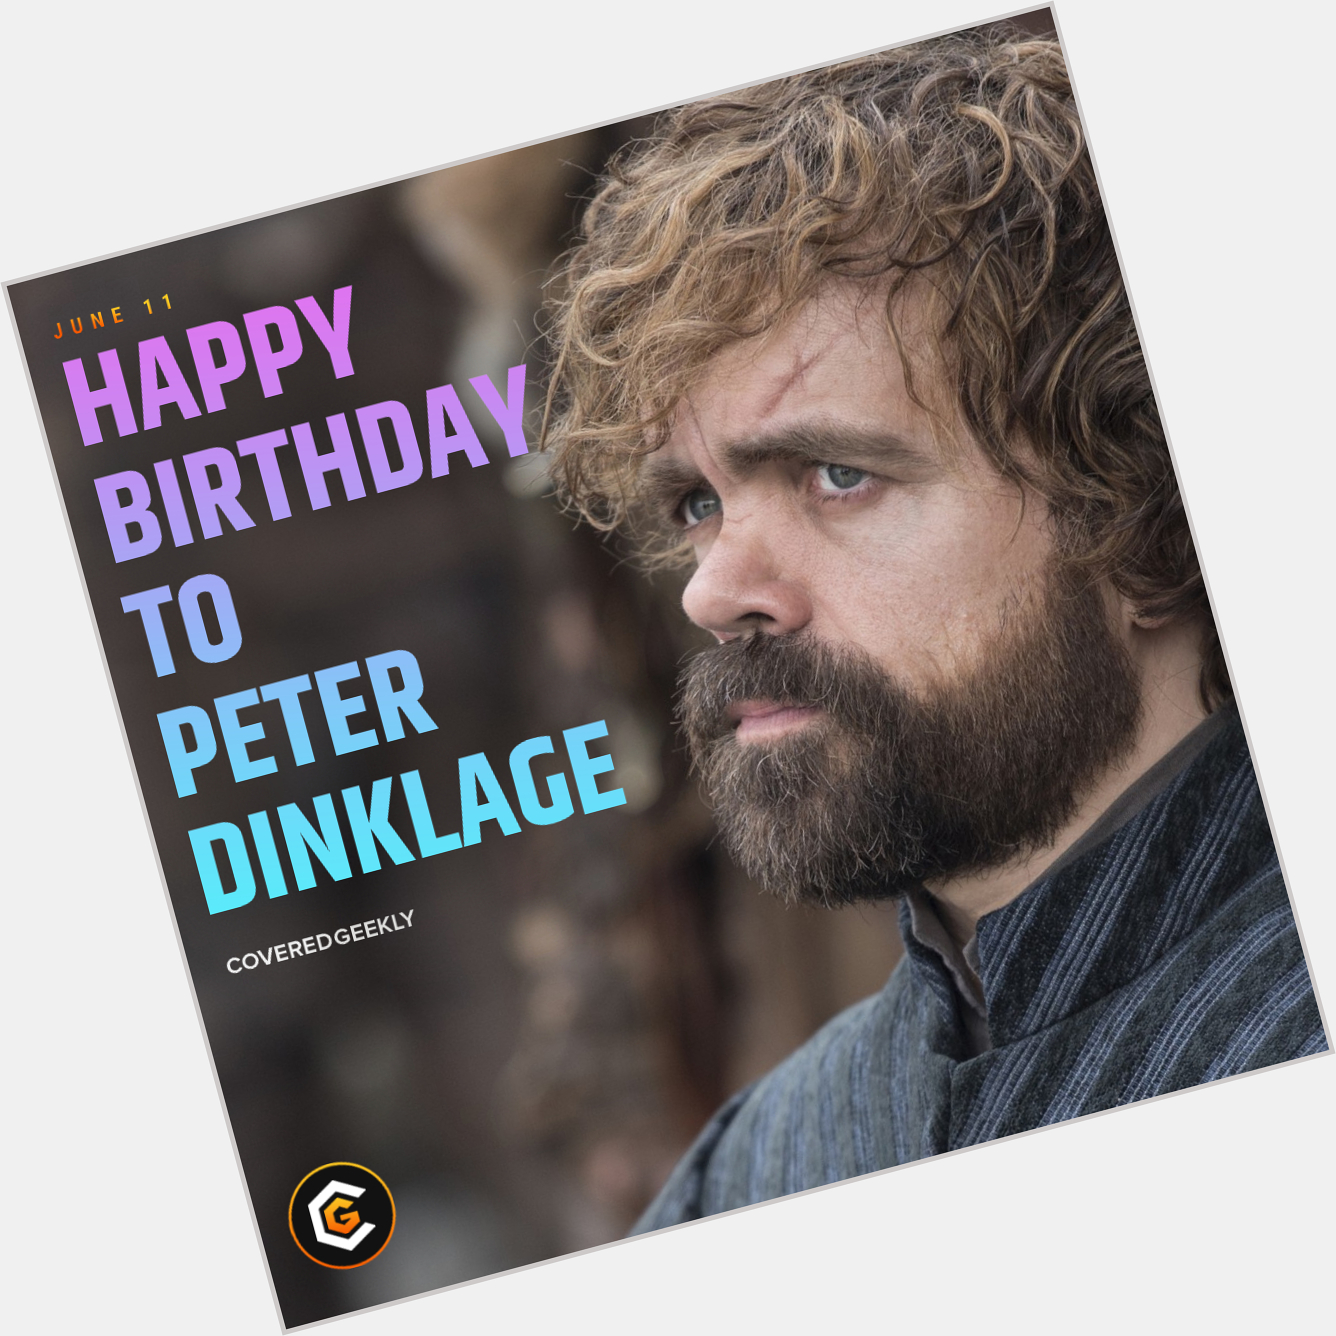 Happy 54th birthday to Peter Dinklage. 